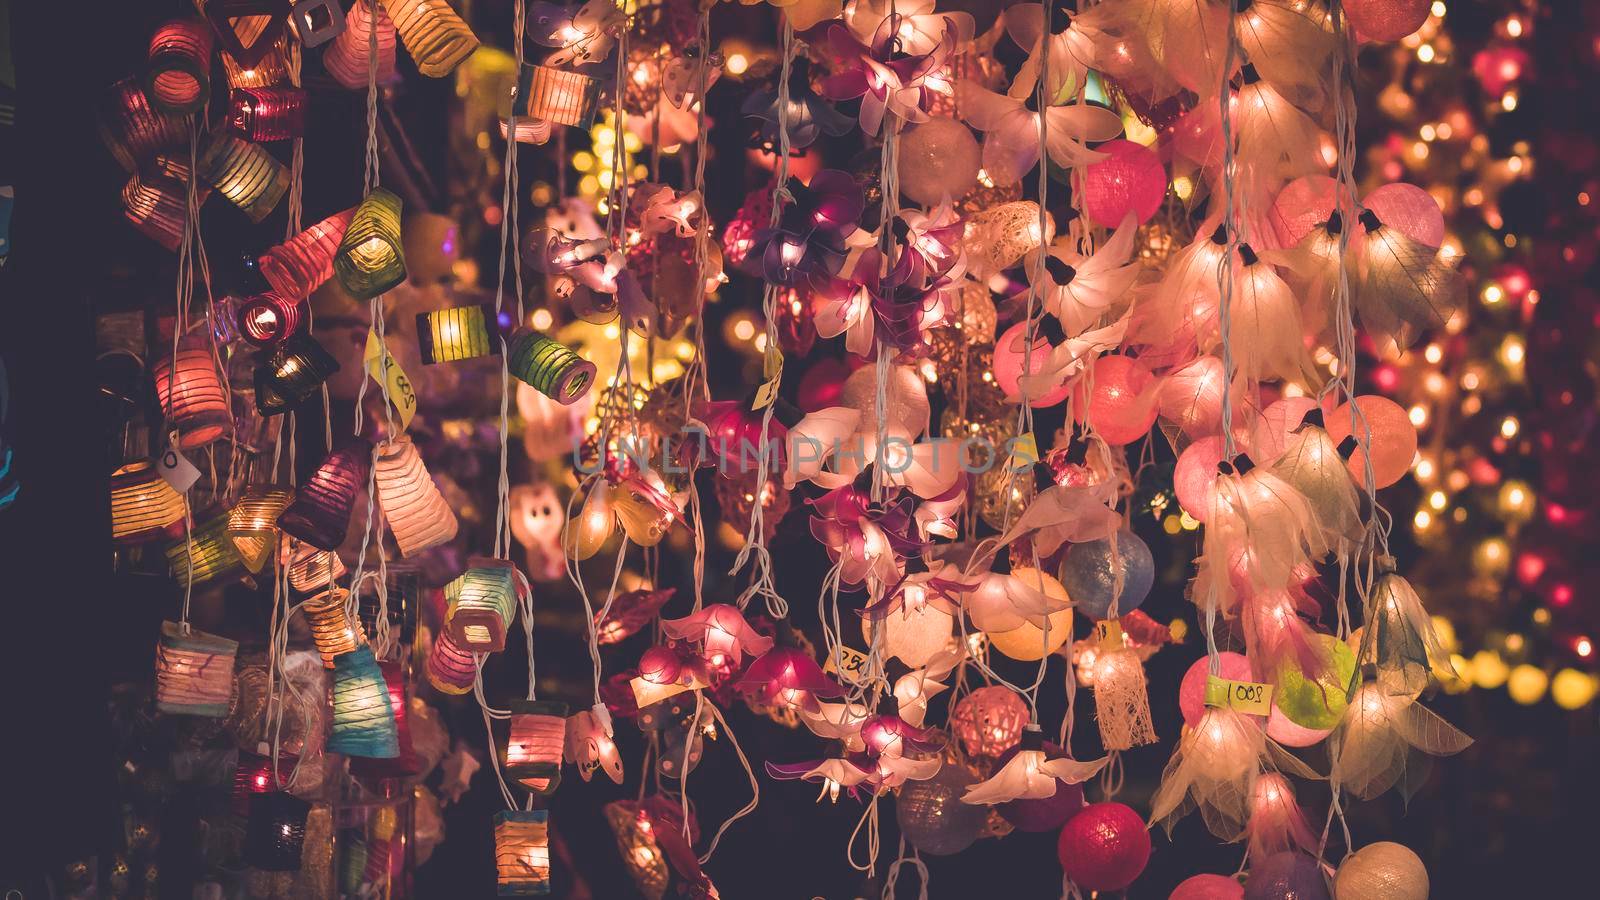 Chinese lantern festival image . Colourful Paper Lantern hanging decorate interior and exterior .outdoor Romantic idea . Christmas Eve  lights, lanterns in paper bags at night along road, street by Petrichor